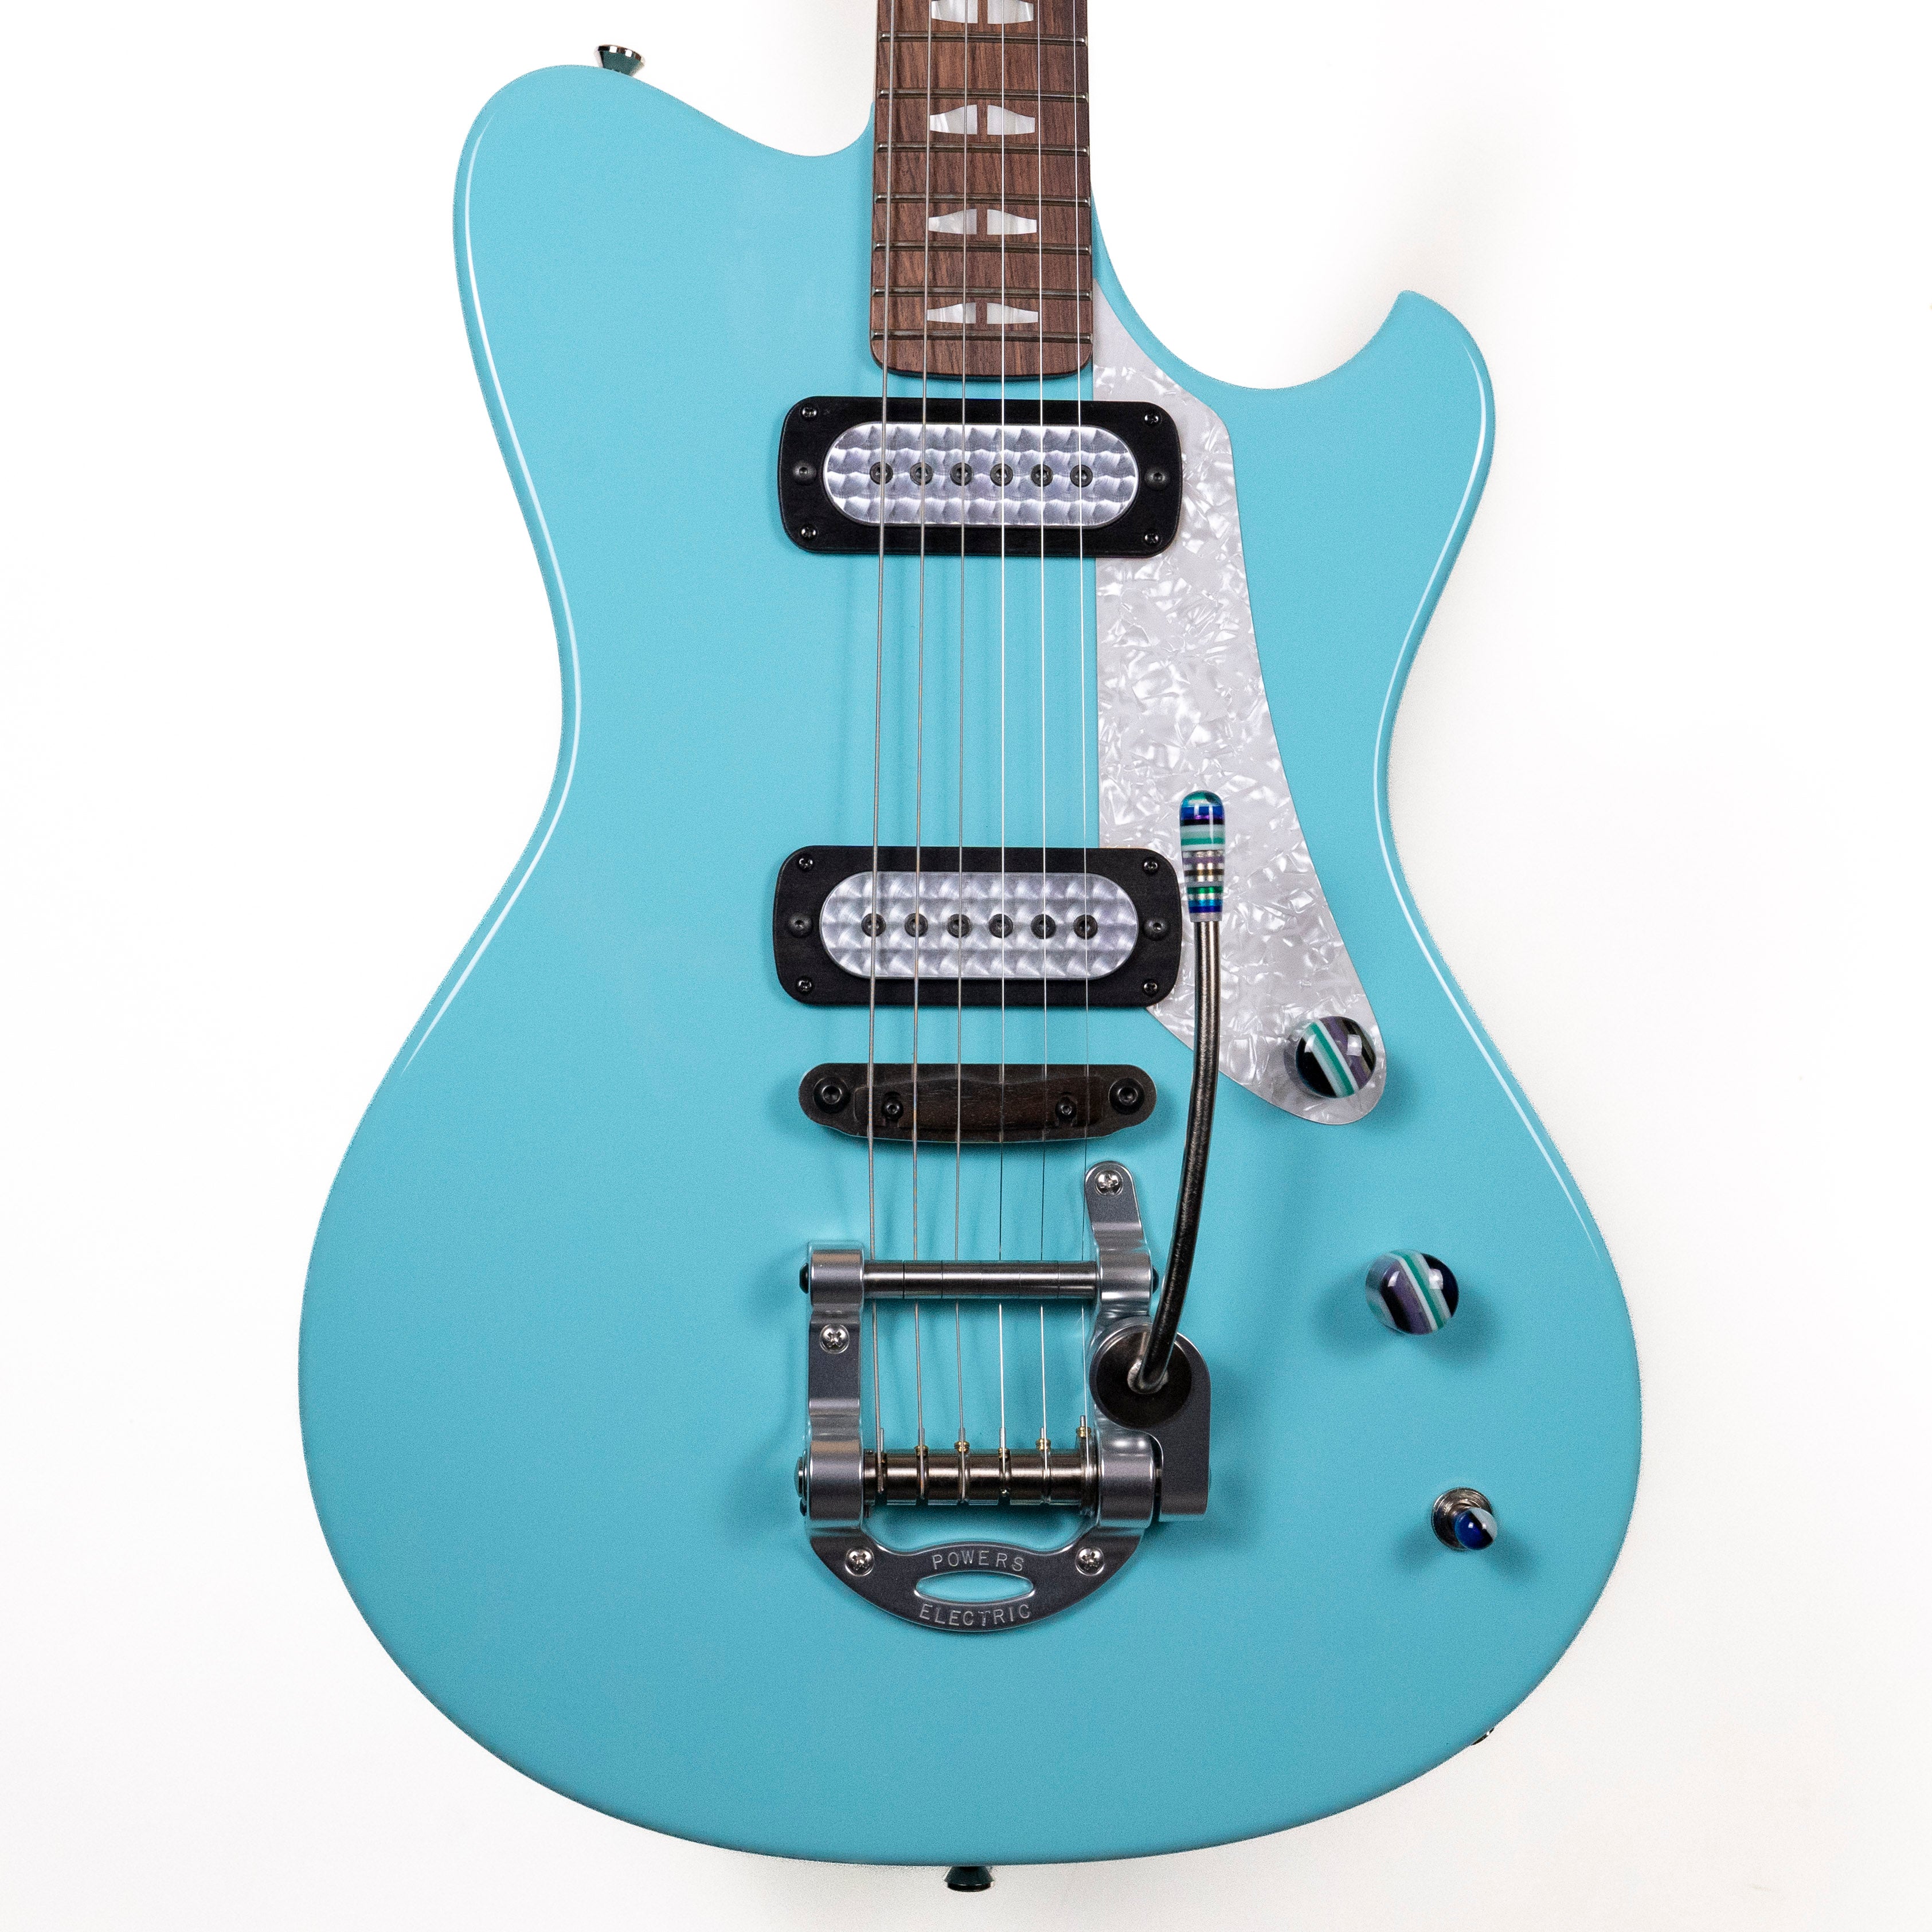 Powers Electric A-Type Larkspur Blue